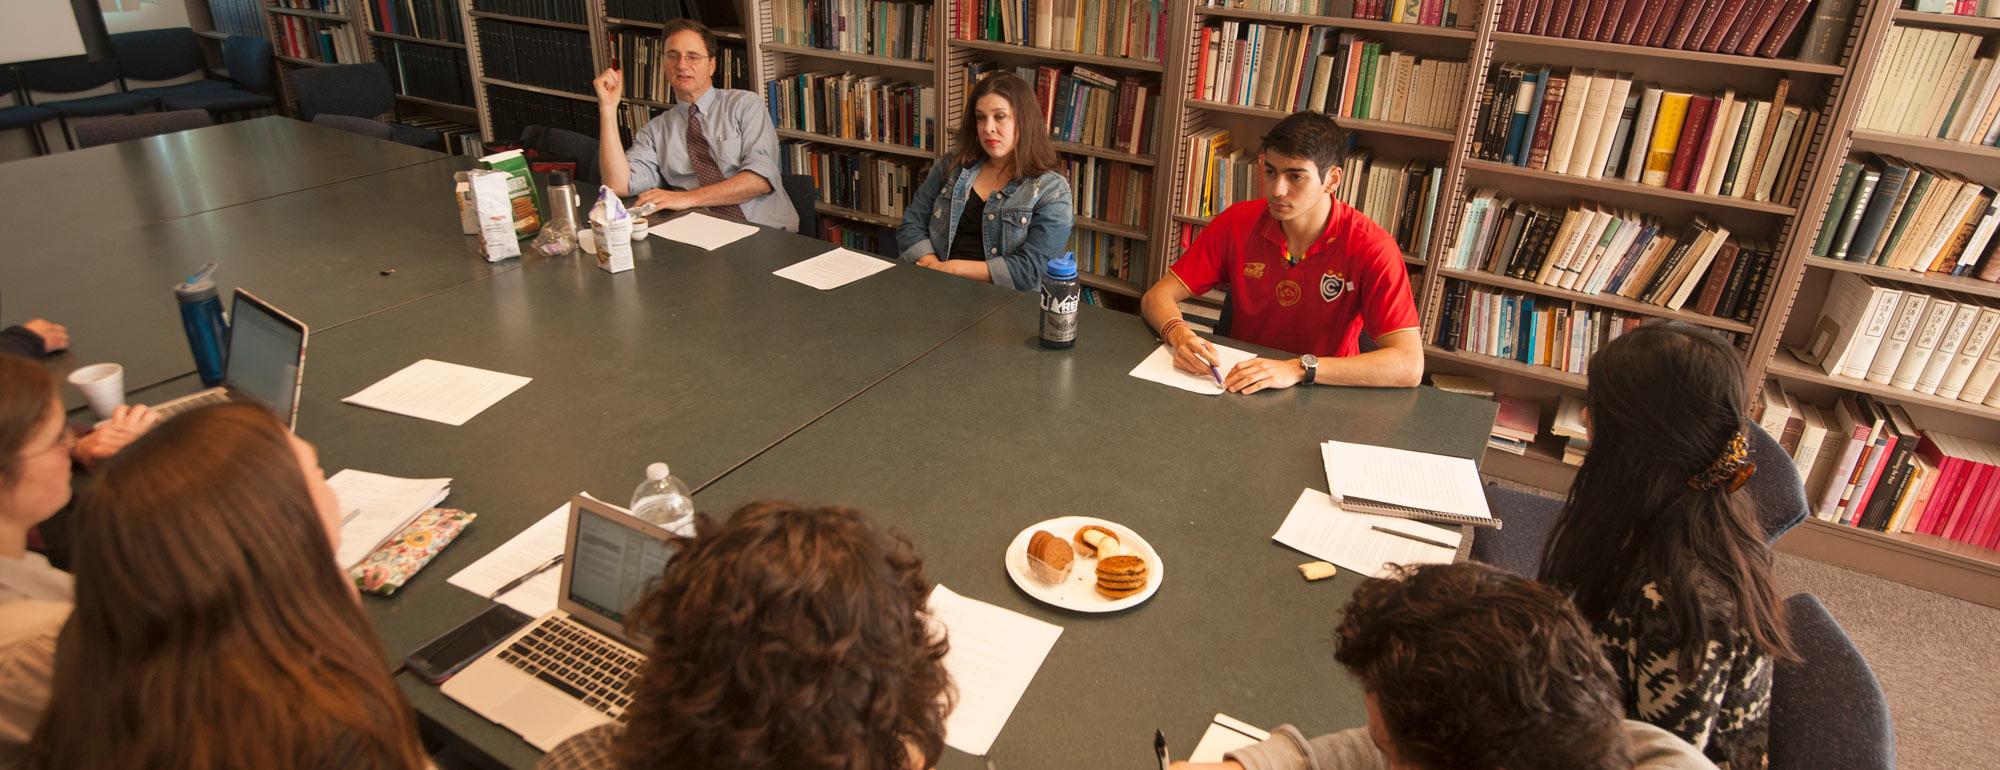 students and a professor sitting around a large table in a room with many books discussing an assignment